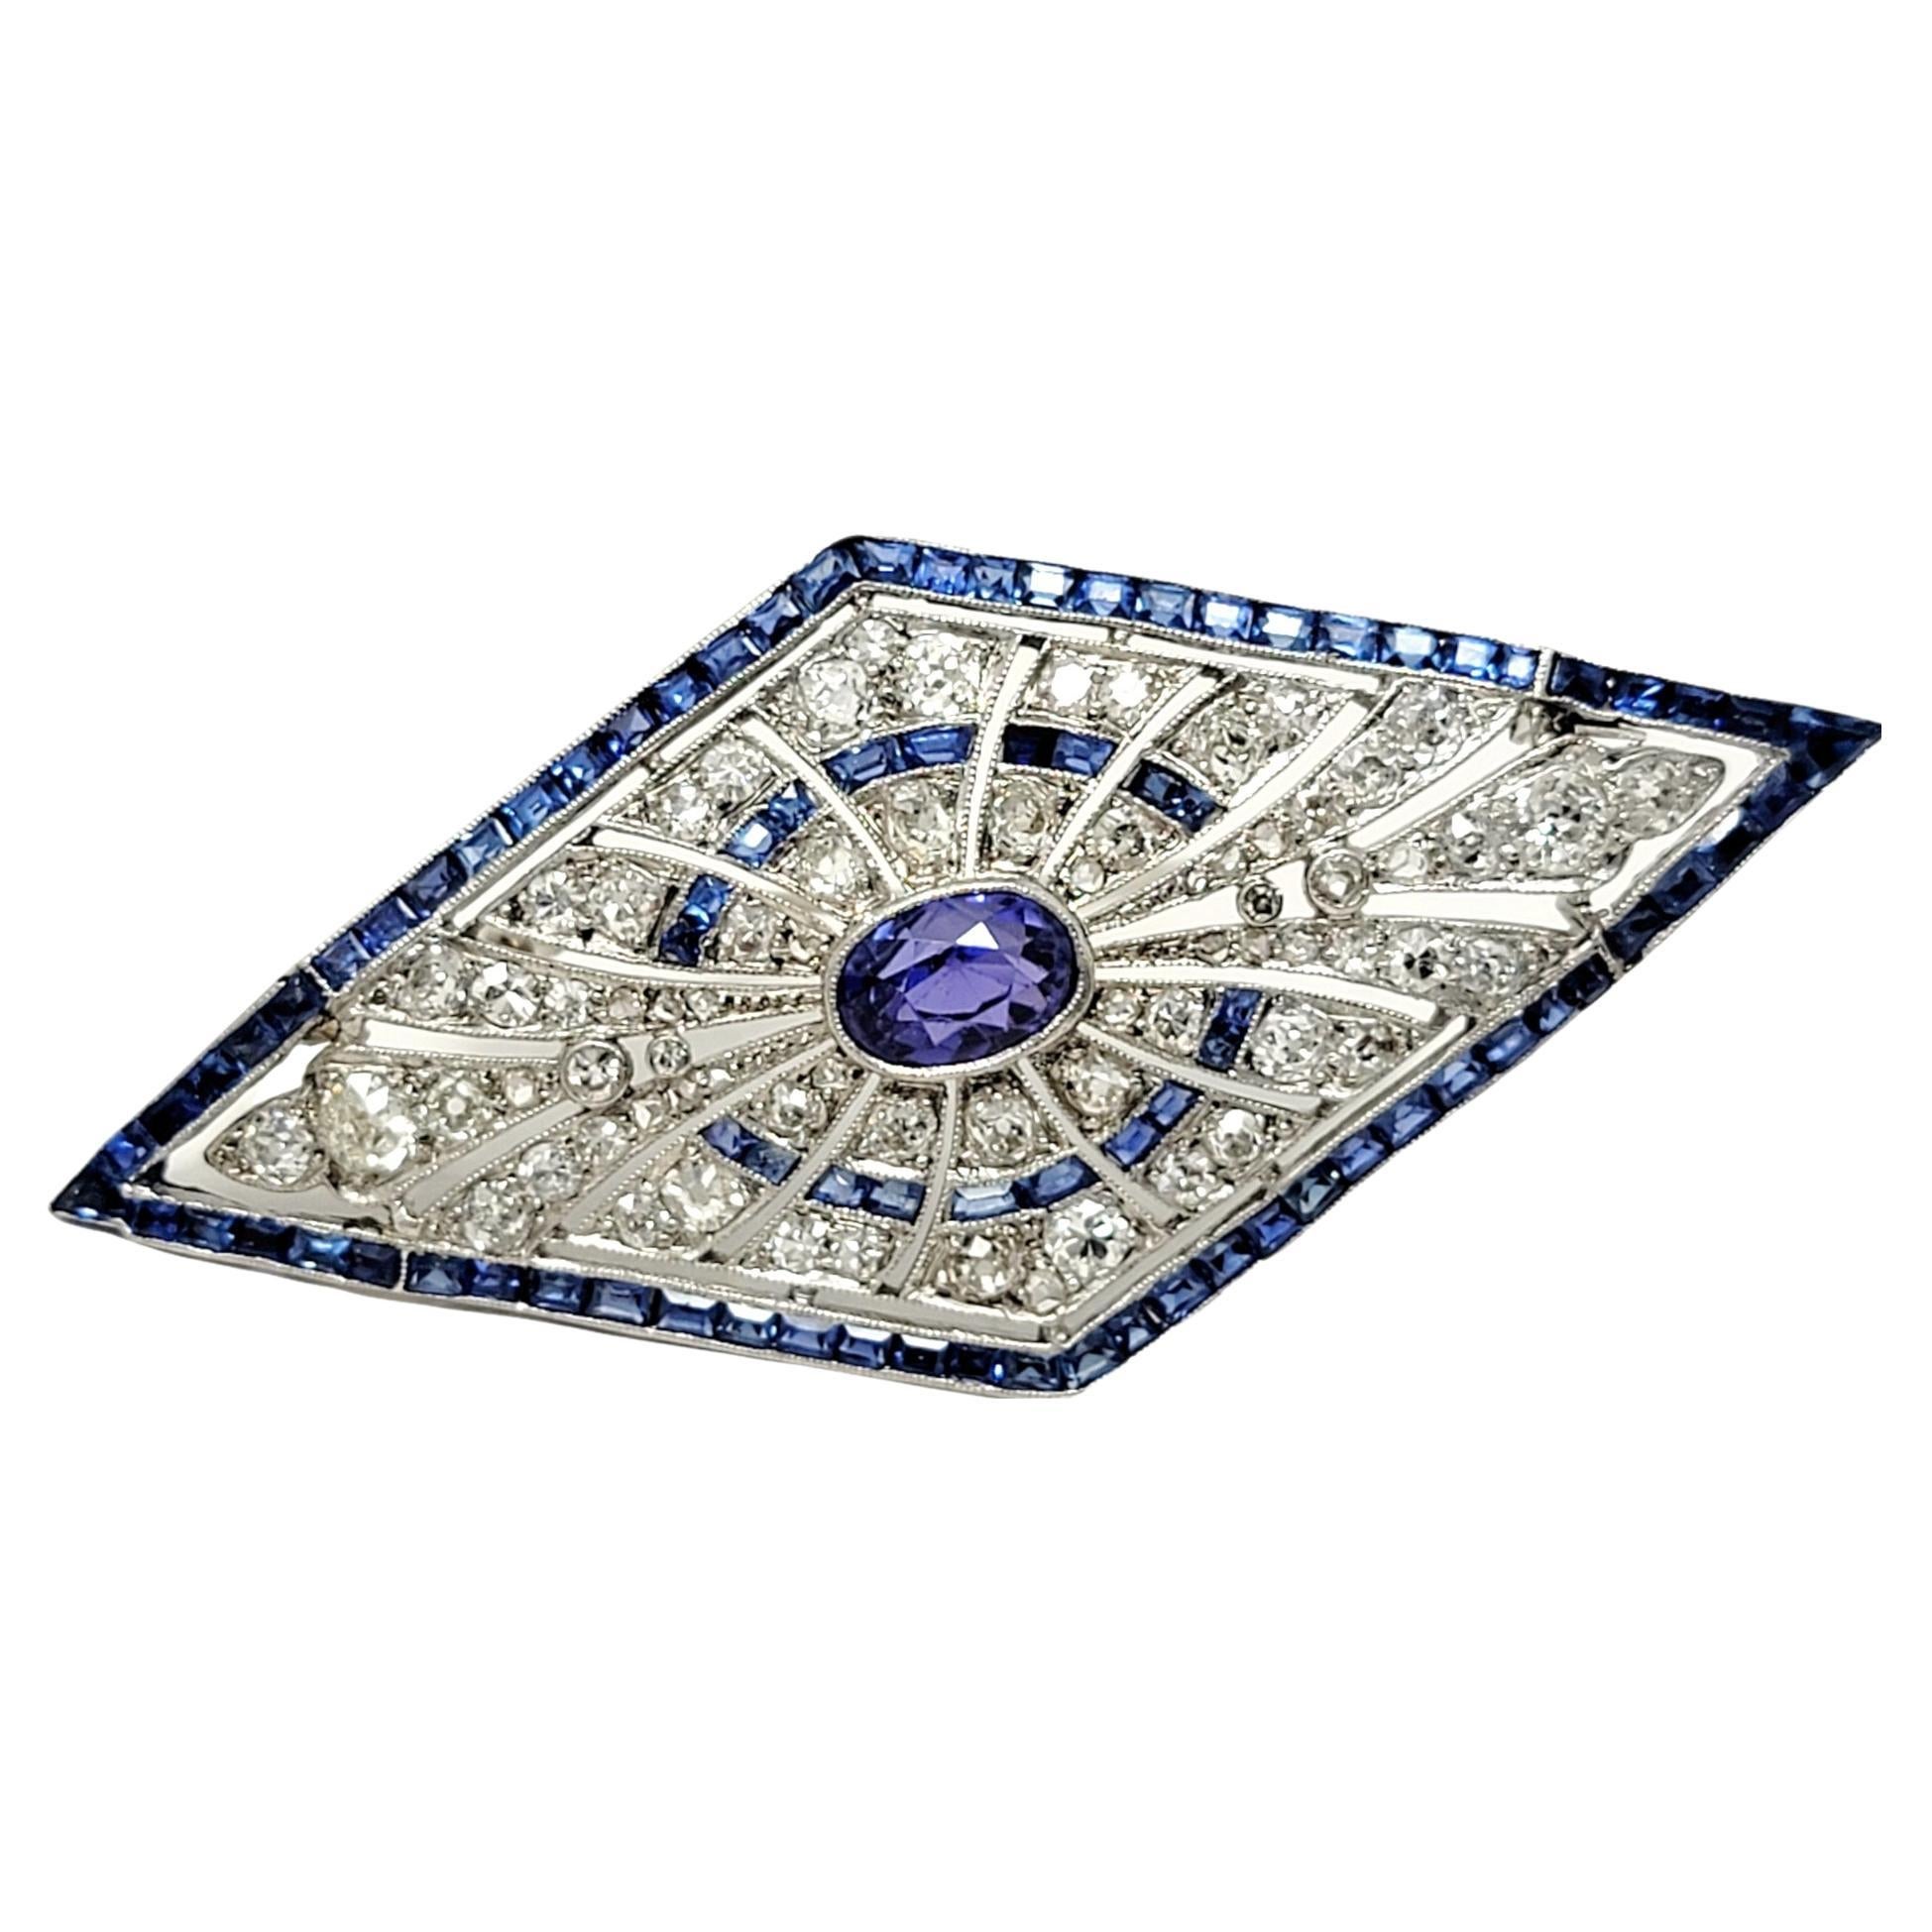 This exquisite vintage sapphire and diamond brooch is a true work of art. This stunning, shimmering piece is bursting with both color and sparkle.  The elegant platinum brooch features an incredible bezel set oval mixed cut natural sapphire in a